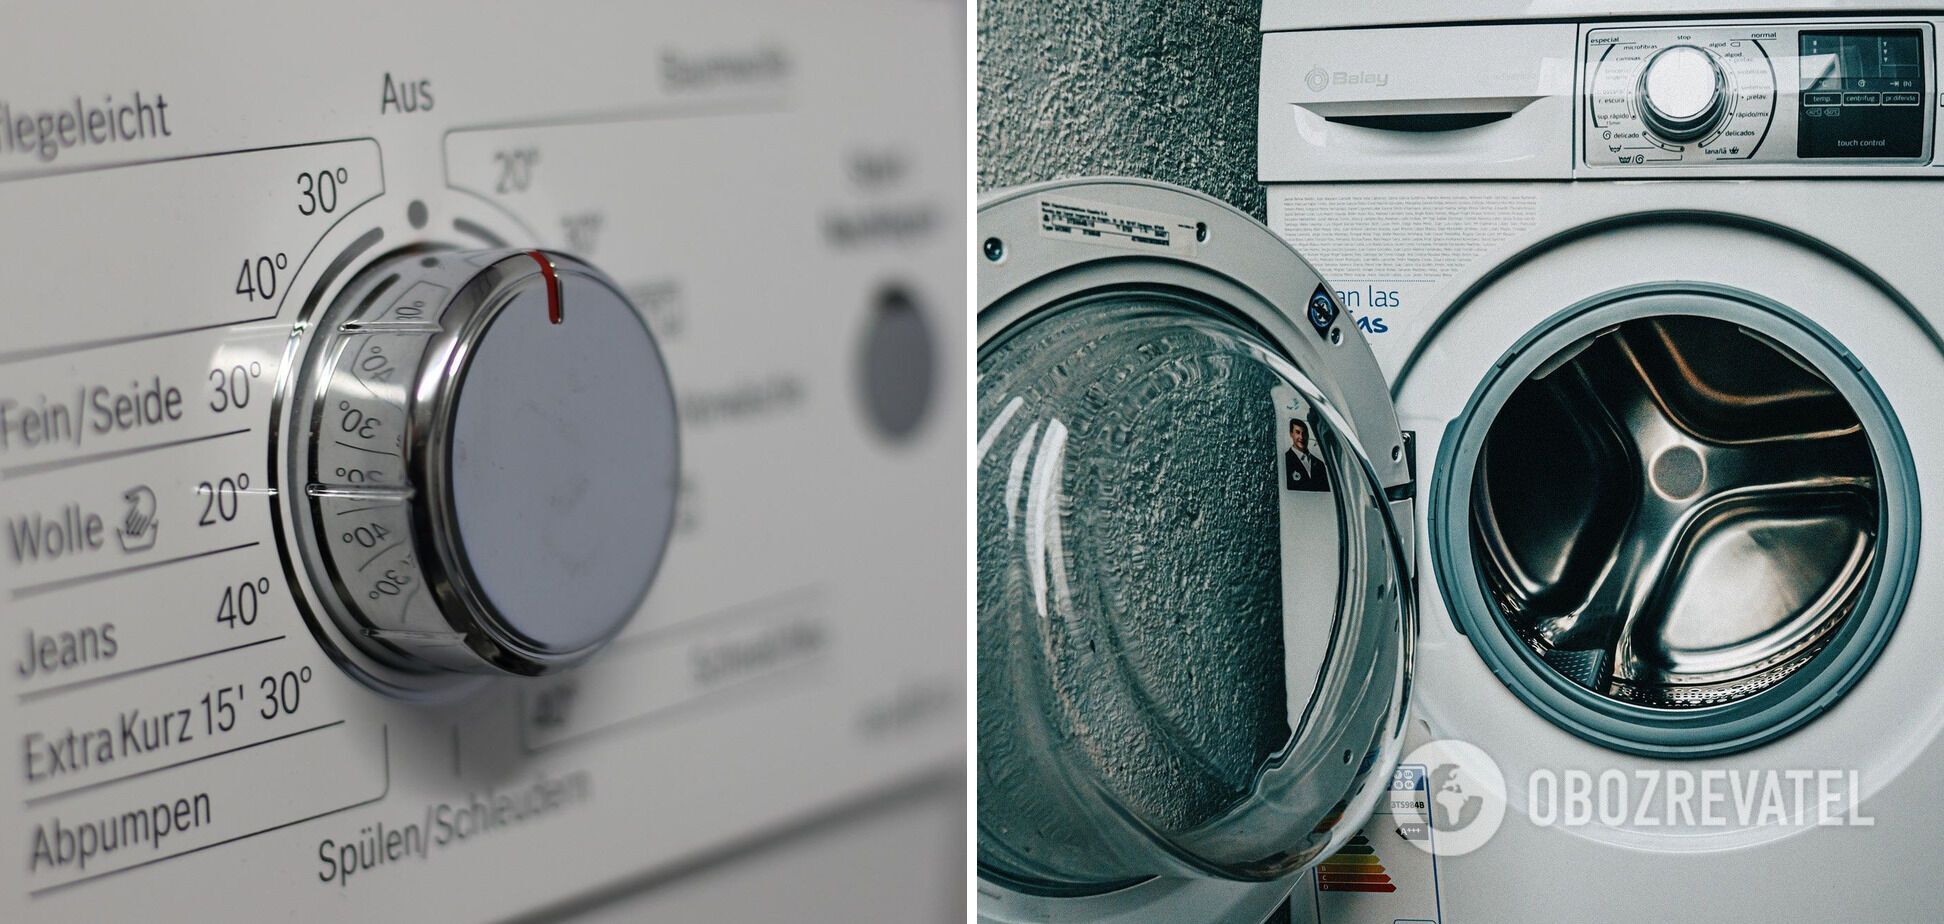 What the three compartments in a washing machine are for and why it is important not to mix them up